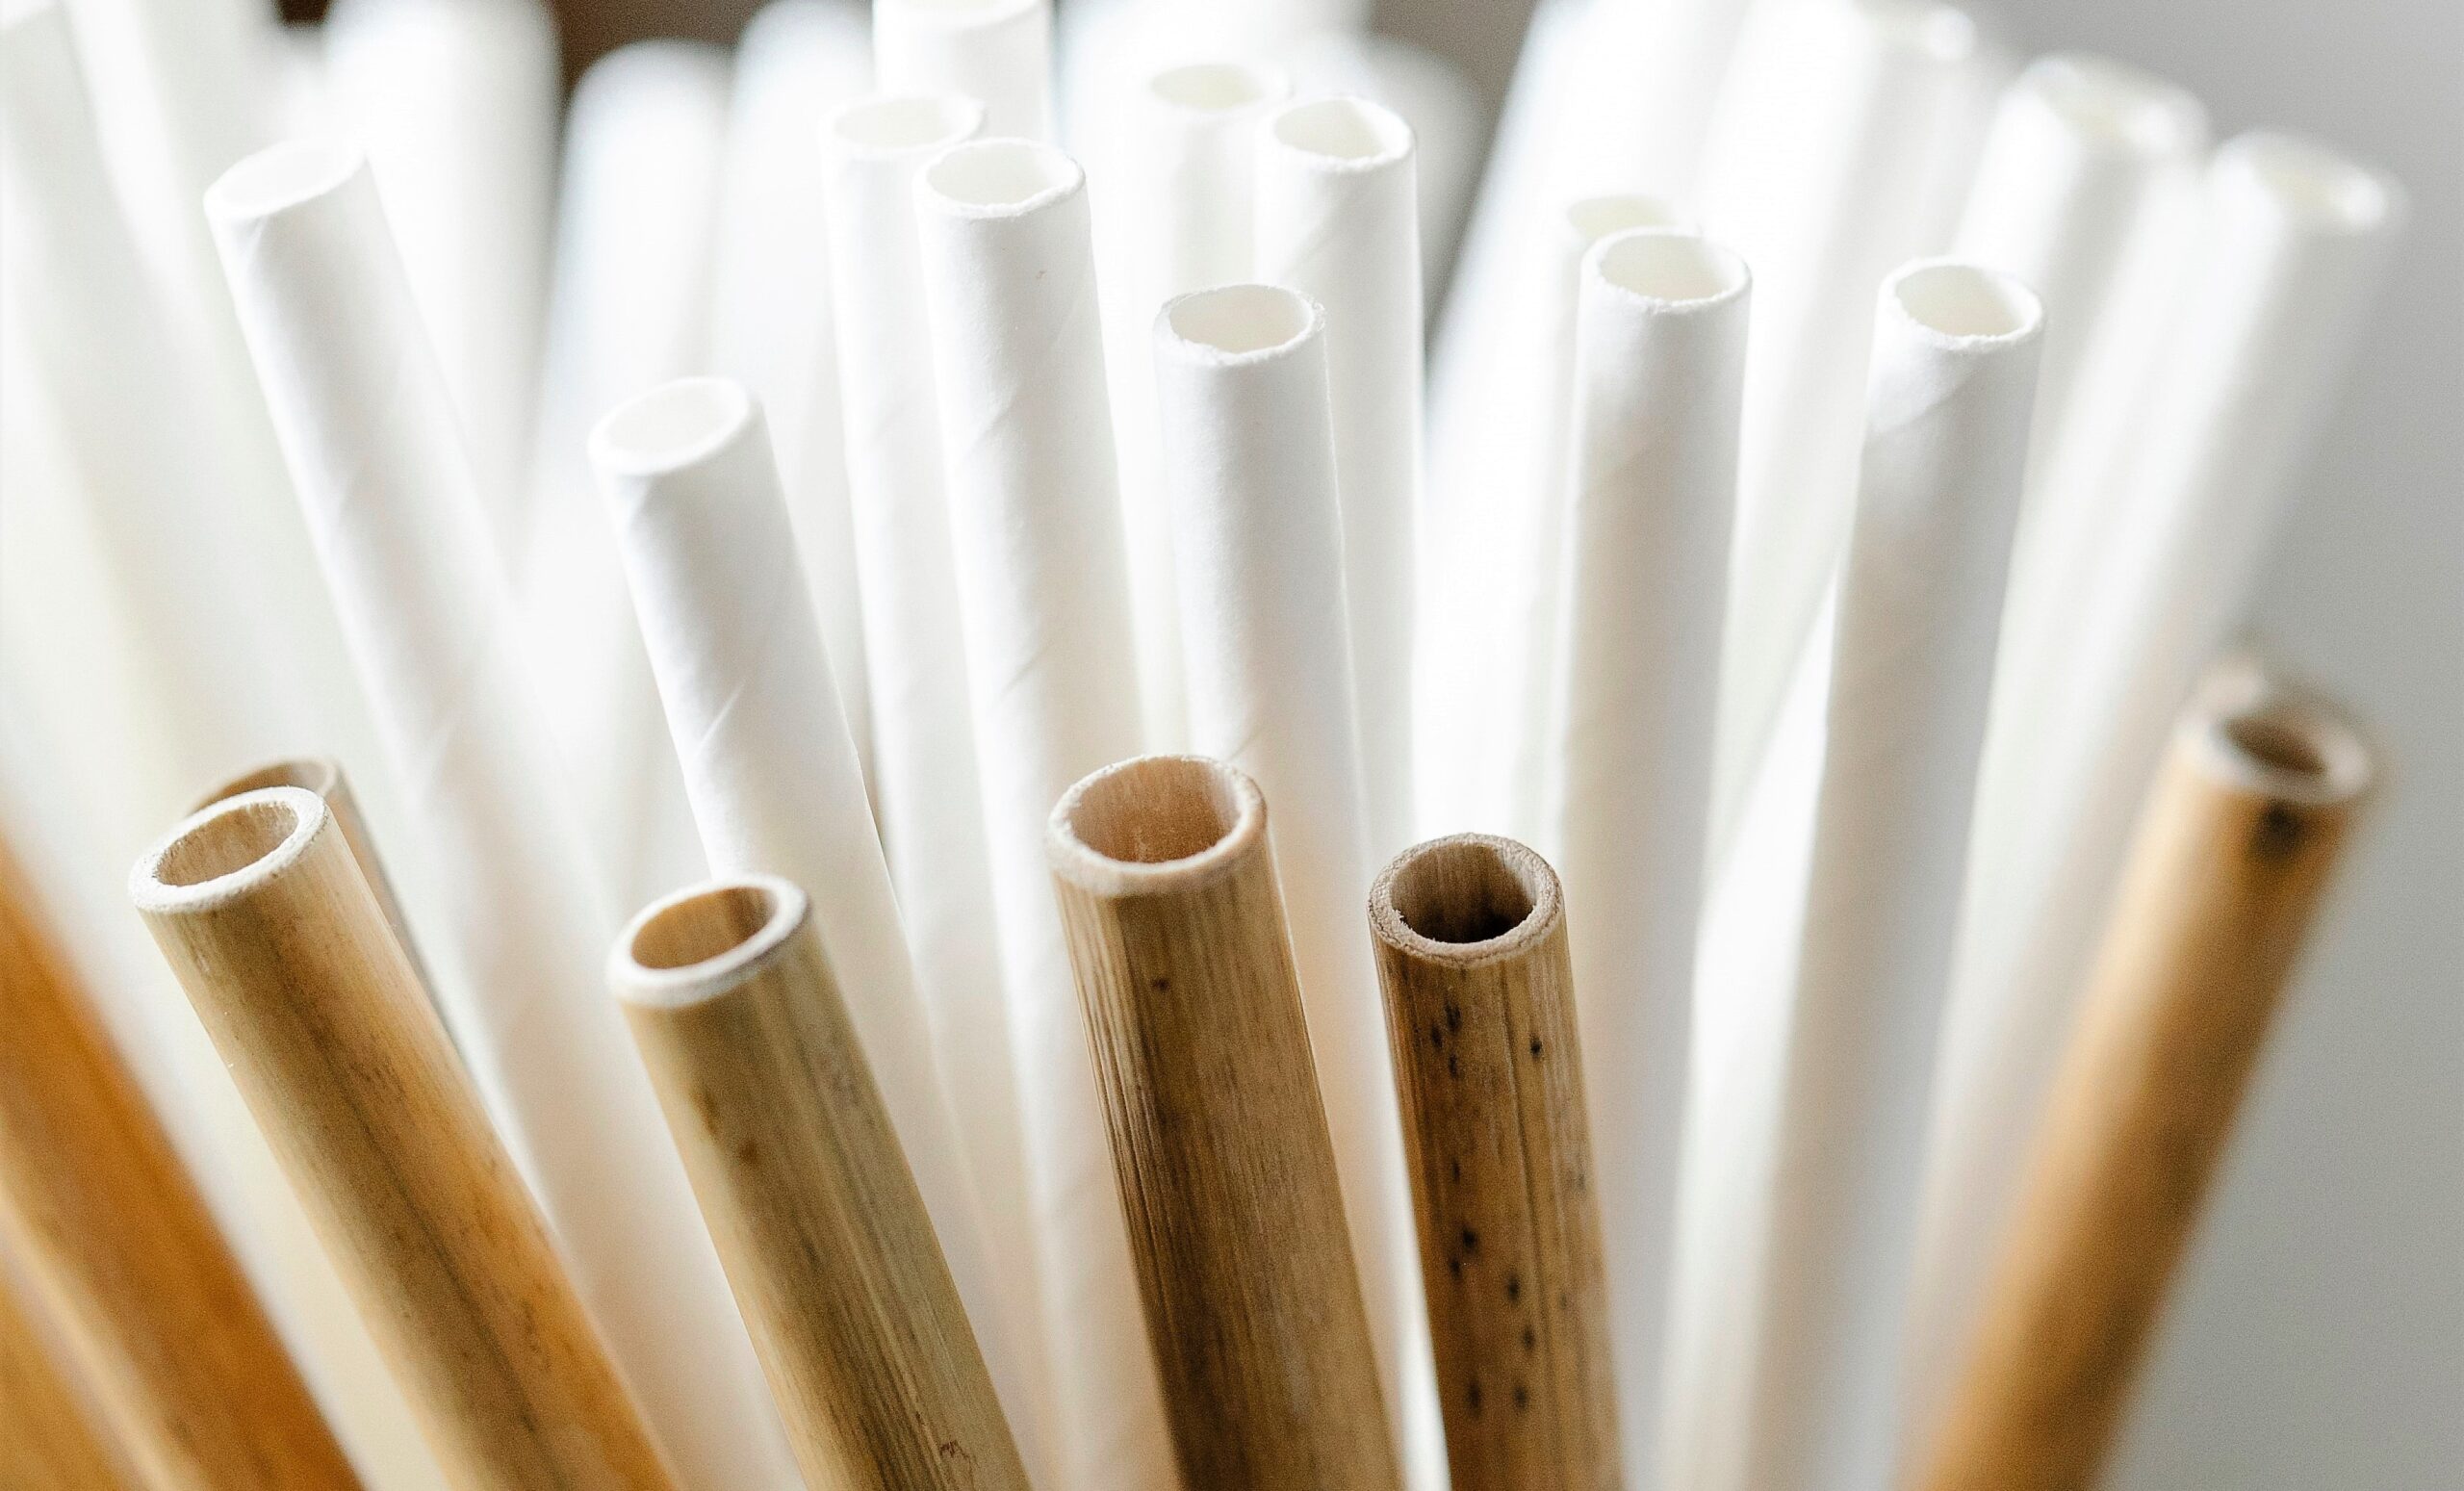 Bamboo straws and white plastic straws are gathered together in a glass.